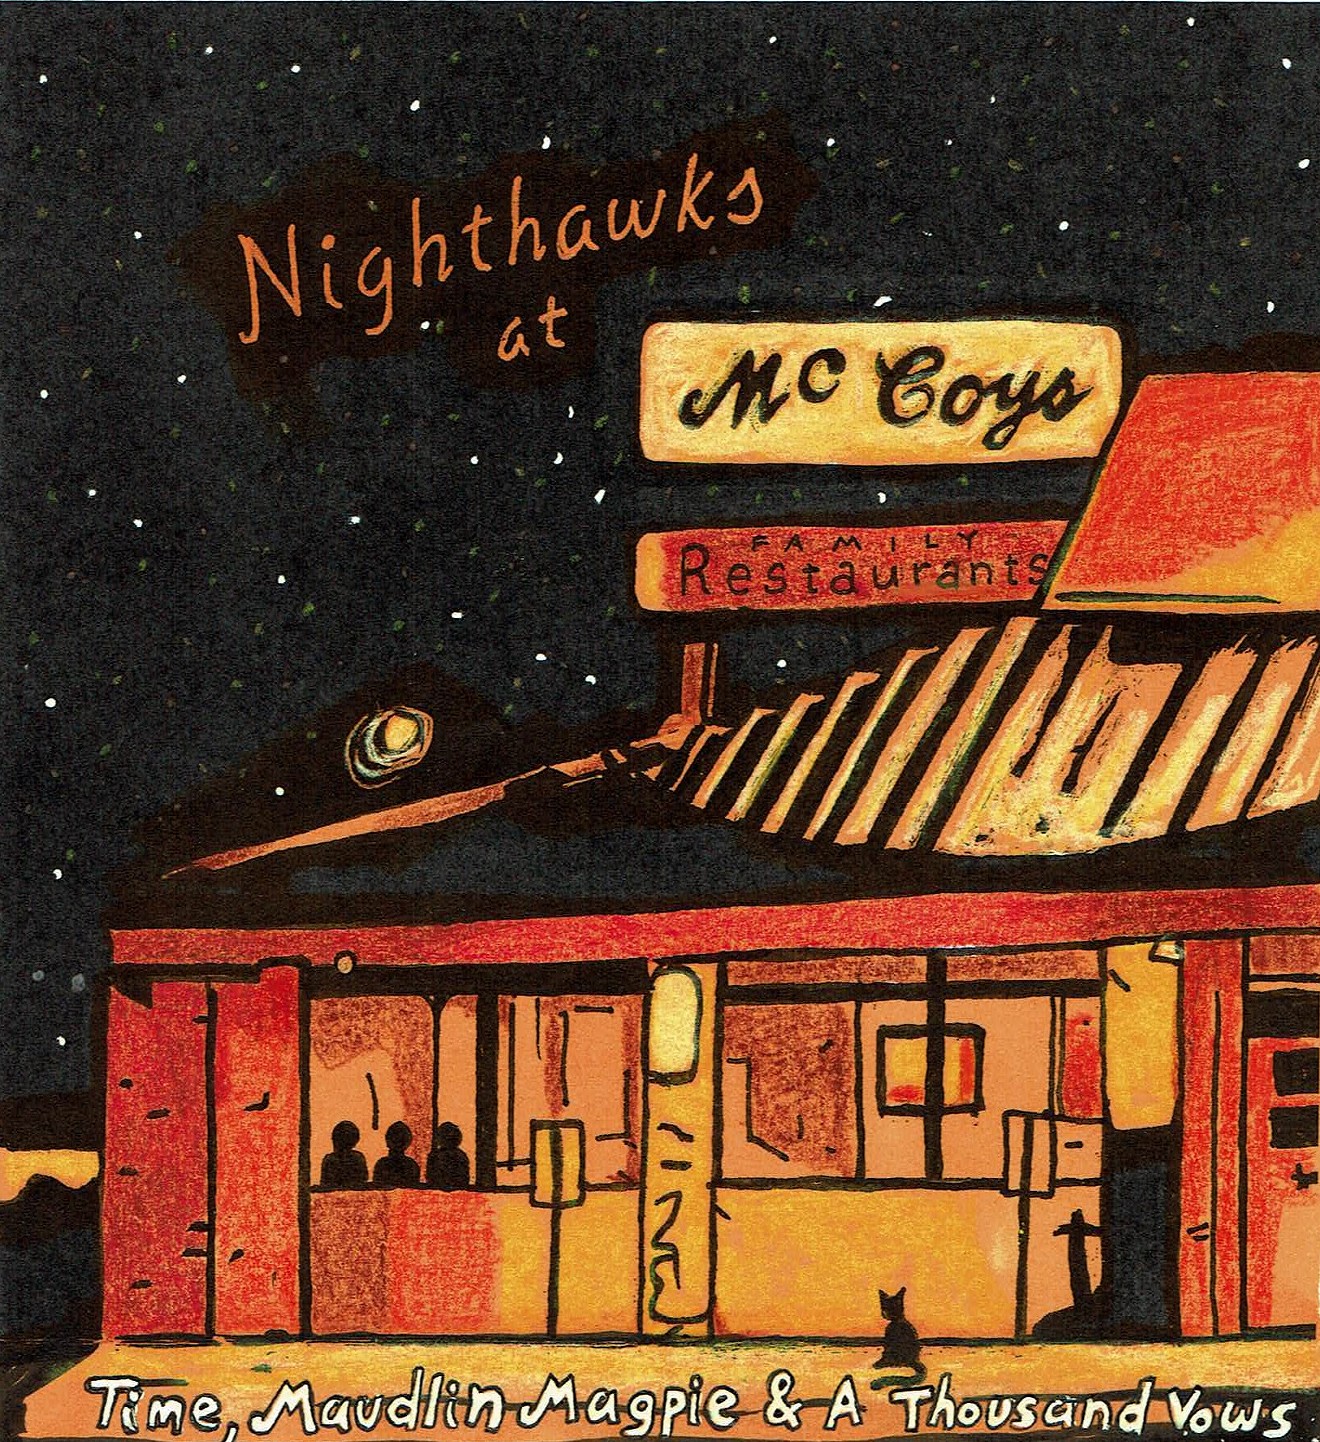 Nighthawks at McCoys pays tribute to McCoy's Family Restaurant in north Denver.